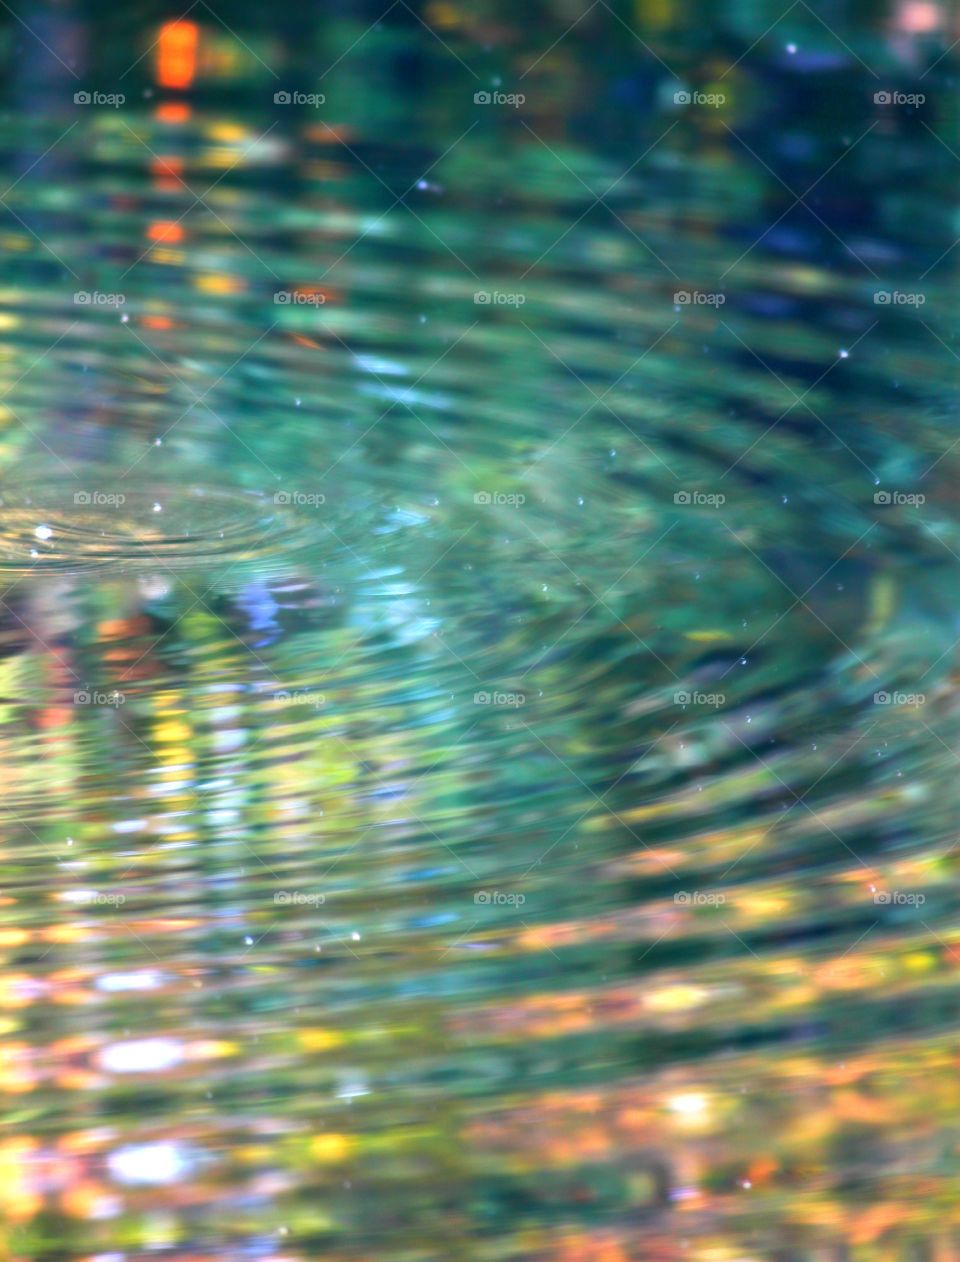 Colored Ripples. The wonders of water can be as simple as a ripple.